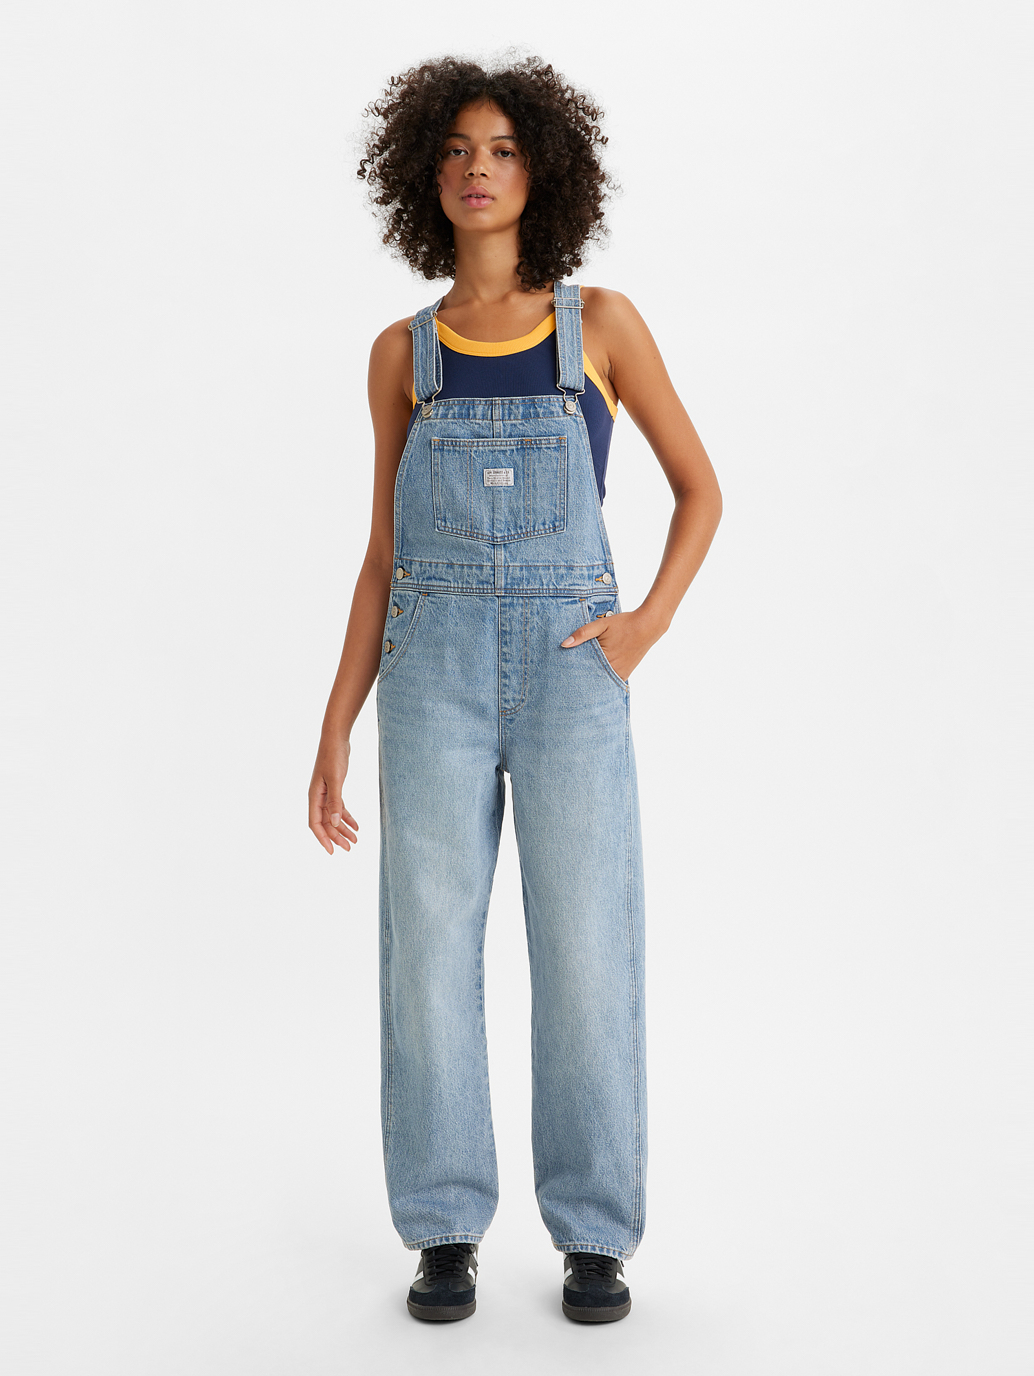 Vintage Denim Overalls in What A Delight